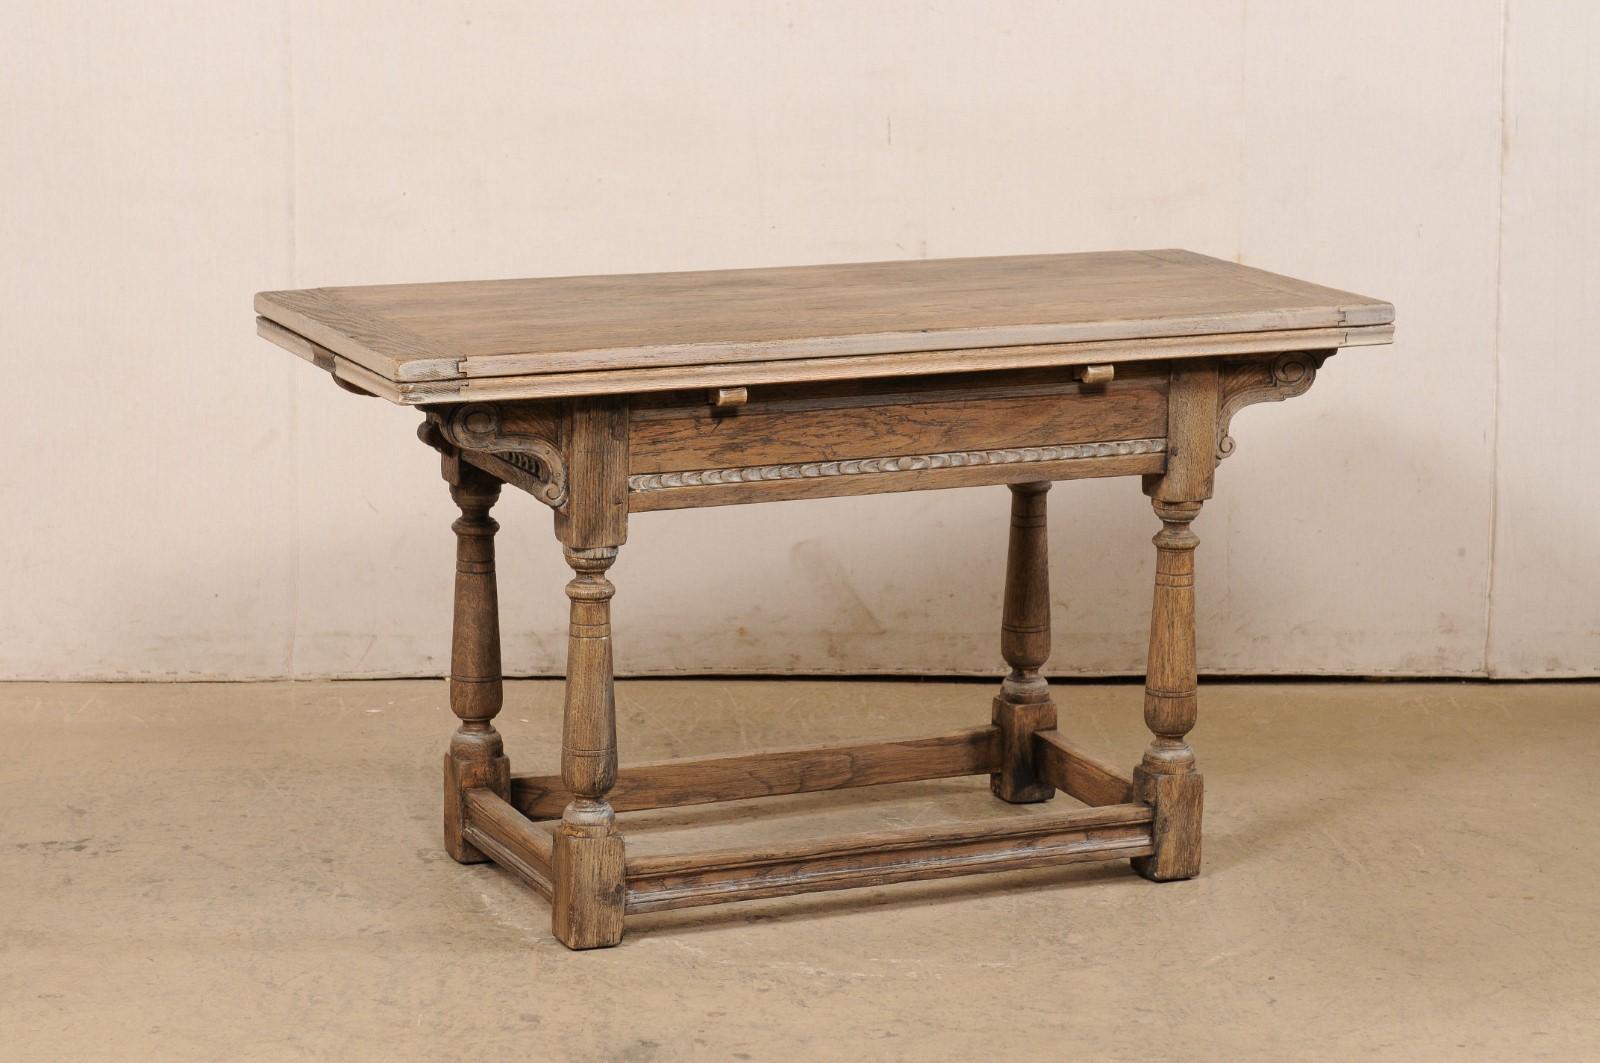 An English carved oak wood table, with expandable top, from the early 20th century. This antique table from England features a rectangular-shaped top (with two leaves tucked beneath which can be pulled out for a larger surface area when needed),